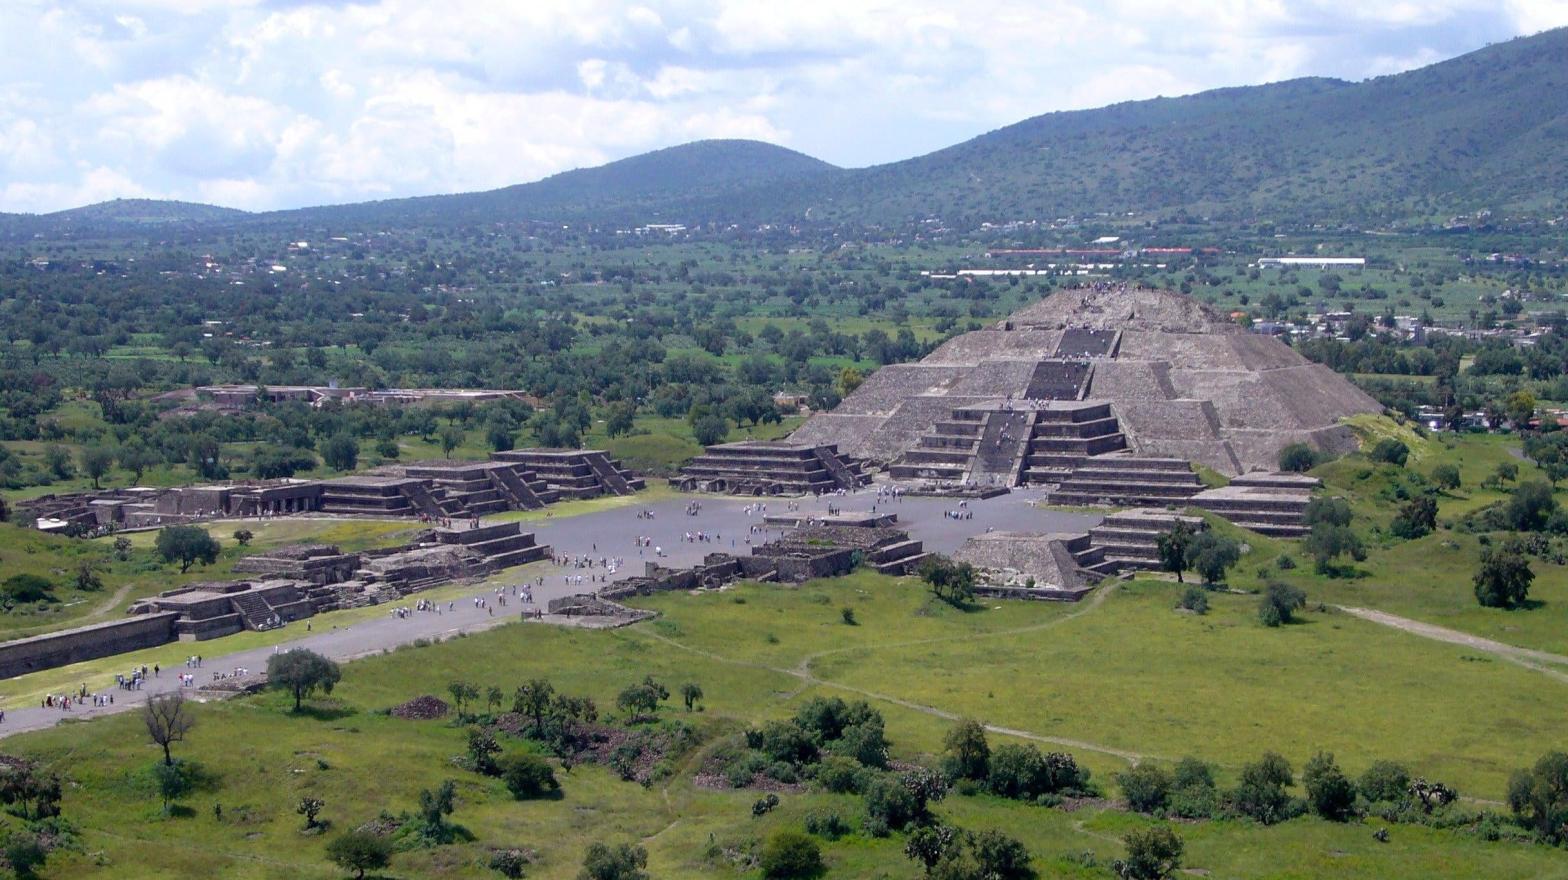 View of the Pyramid of the Moon from the Pyramid of the Sun. (Image: Gorgo, Fair Use)